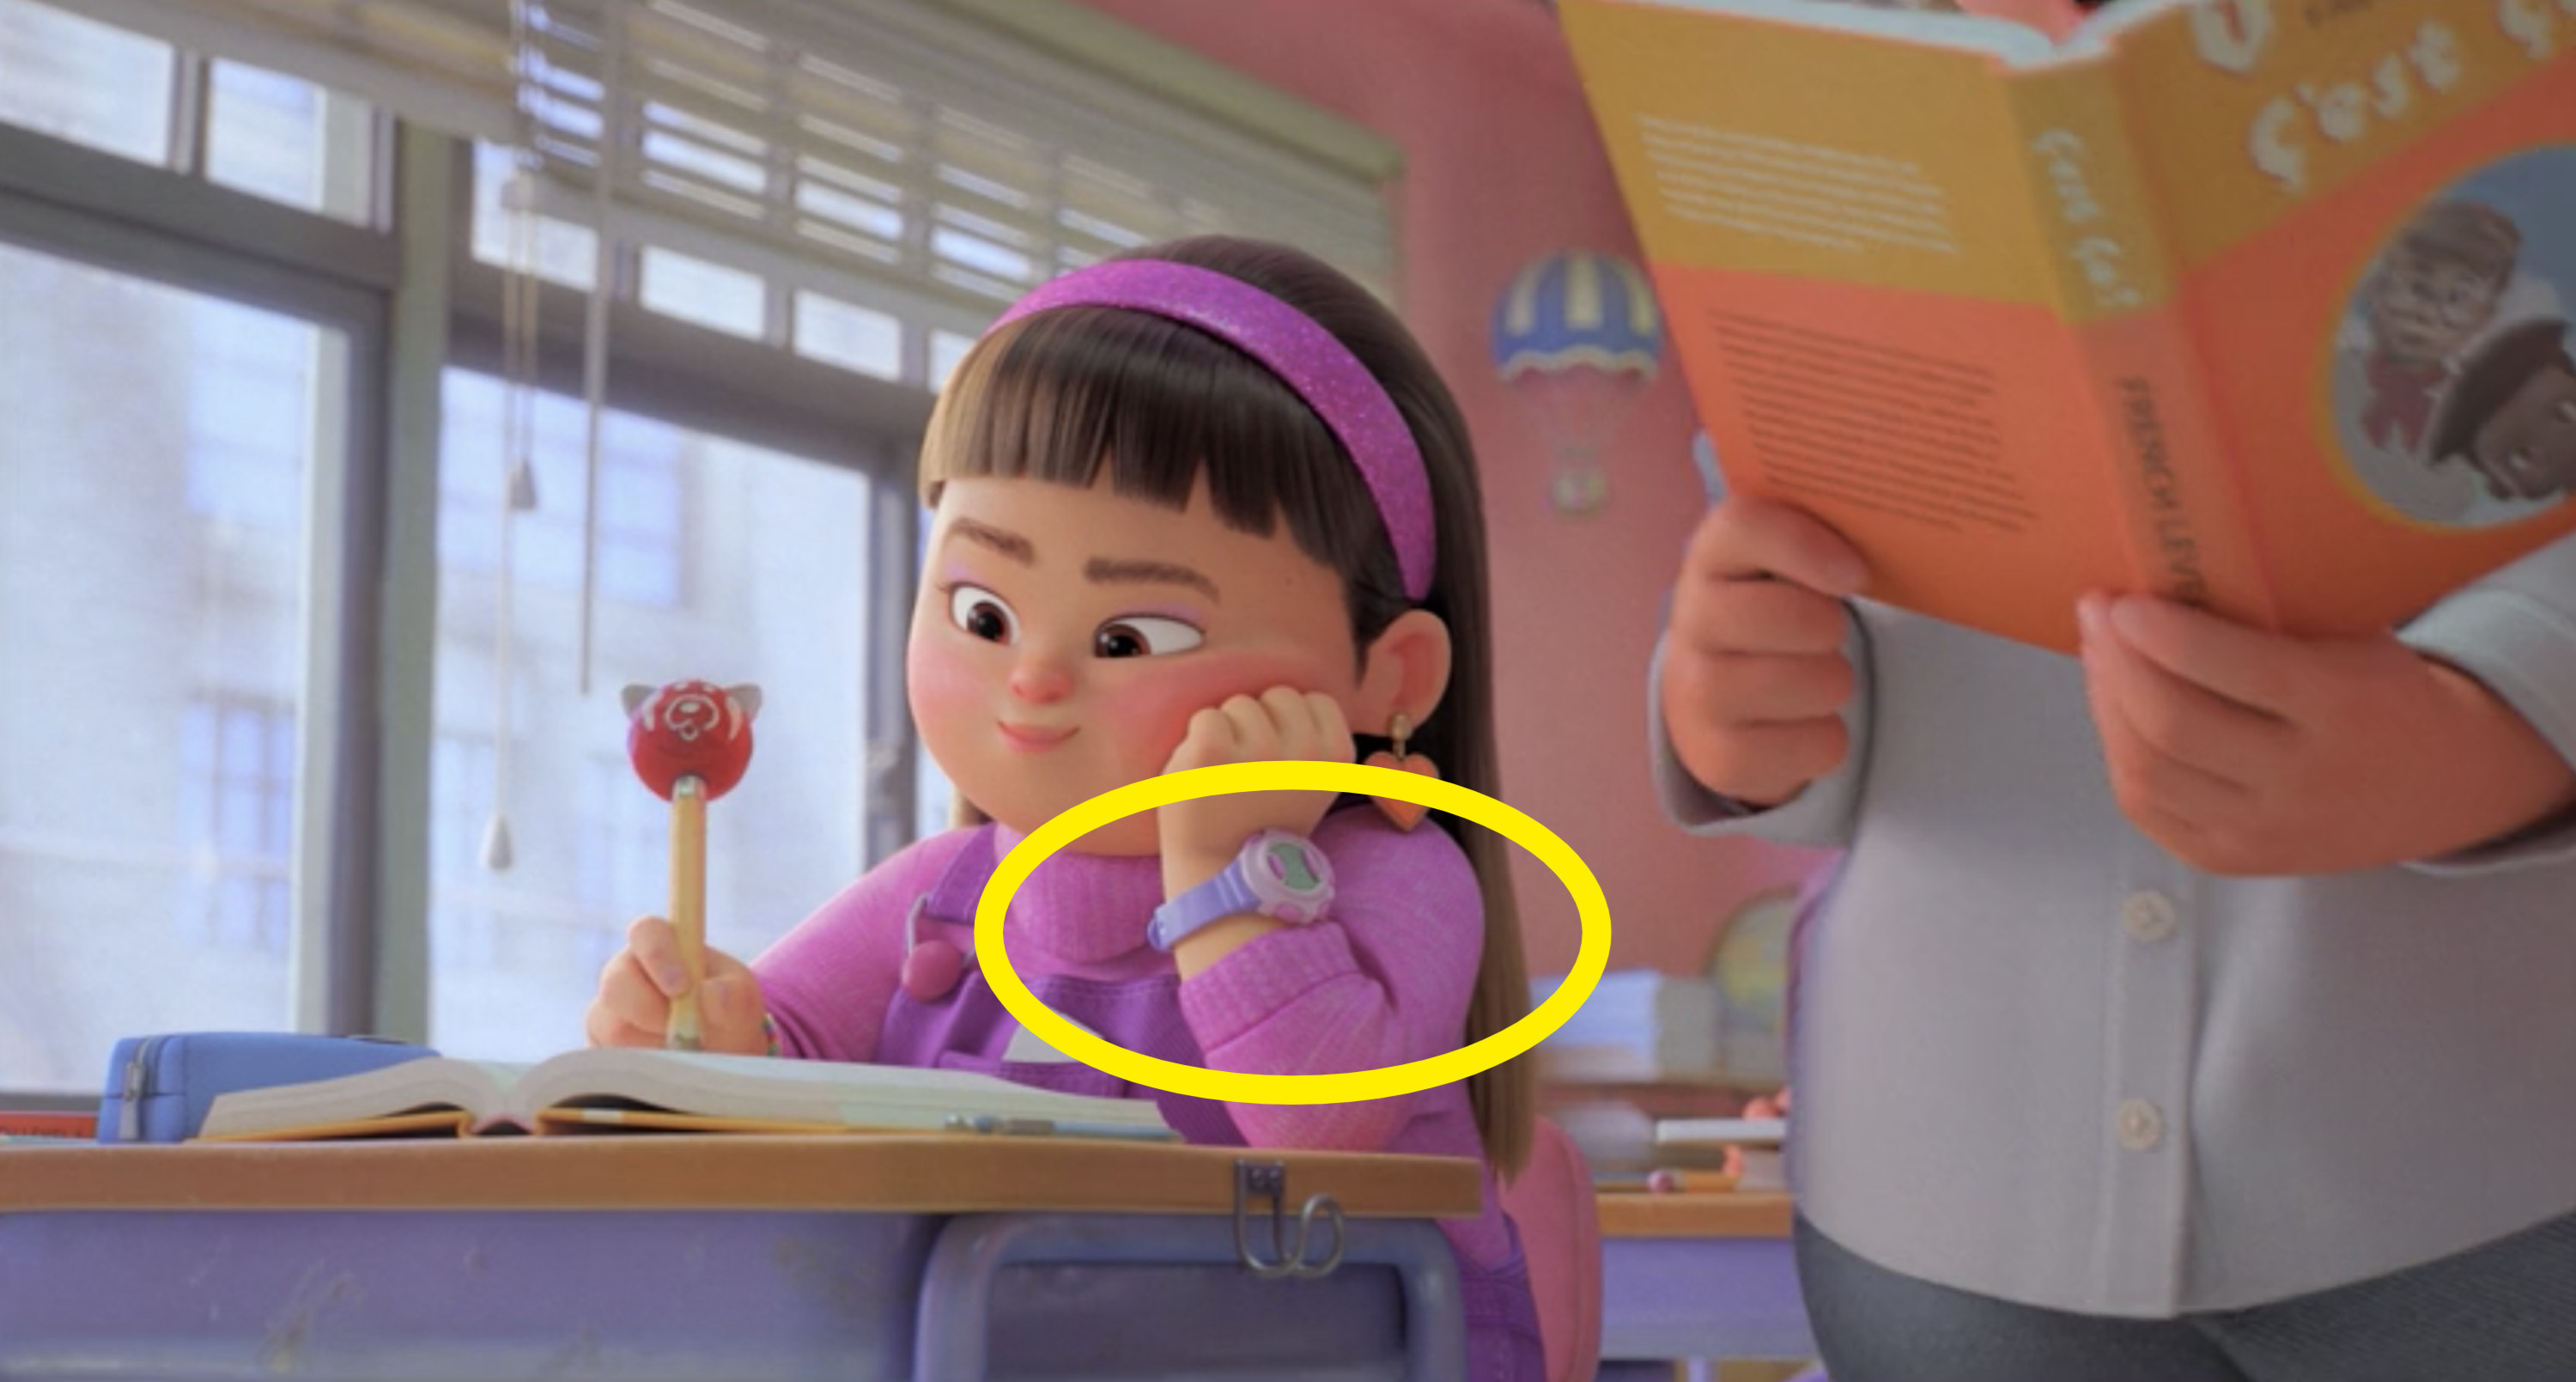 Abby writing in her book with her other hand on her cheek, and the watch circled